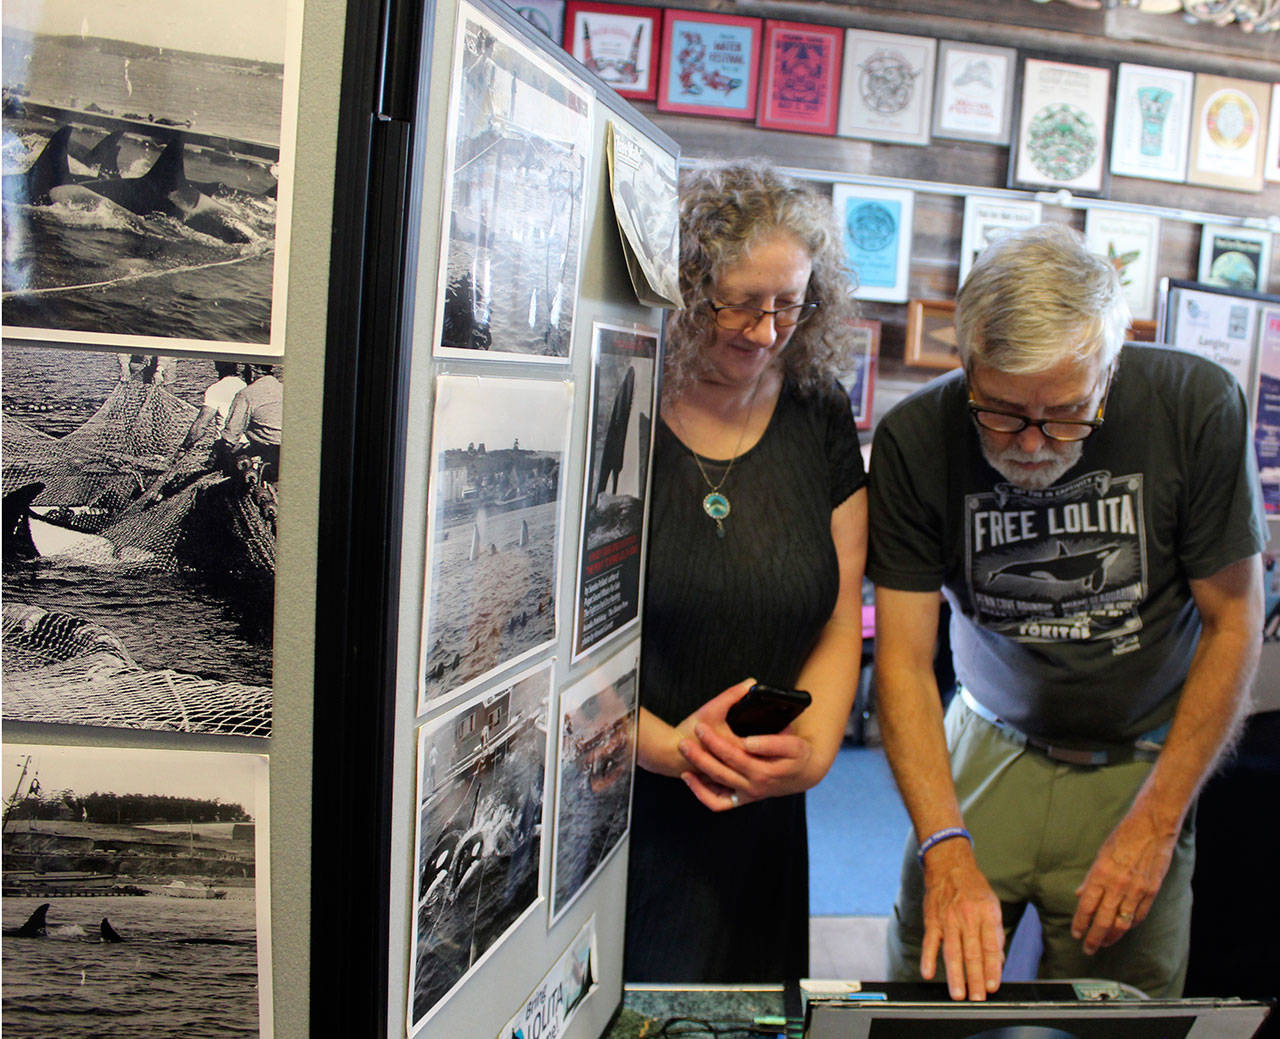 Orca Network’s Susan Berta and Howard Garrett have led the fight to return Lolita to her home waters of Puget Sound. In August 2018, they set up an educational display about the killer whale round-ups on Coupeville wharf before leading a commemorative ceremony honoring captured and deceased orcas. (Photo by Patricia Guthrie/Whidbey News Group)